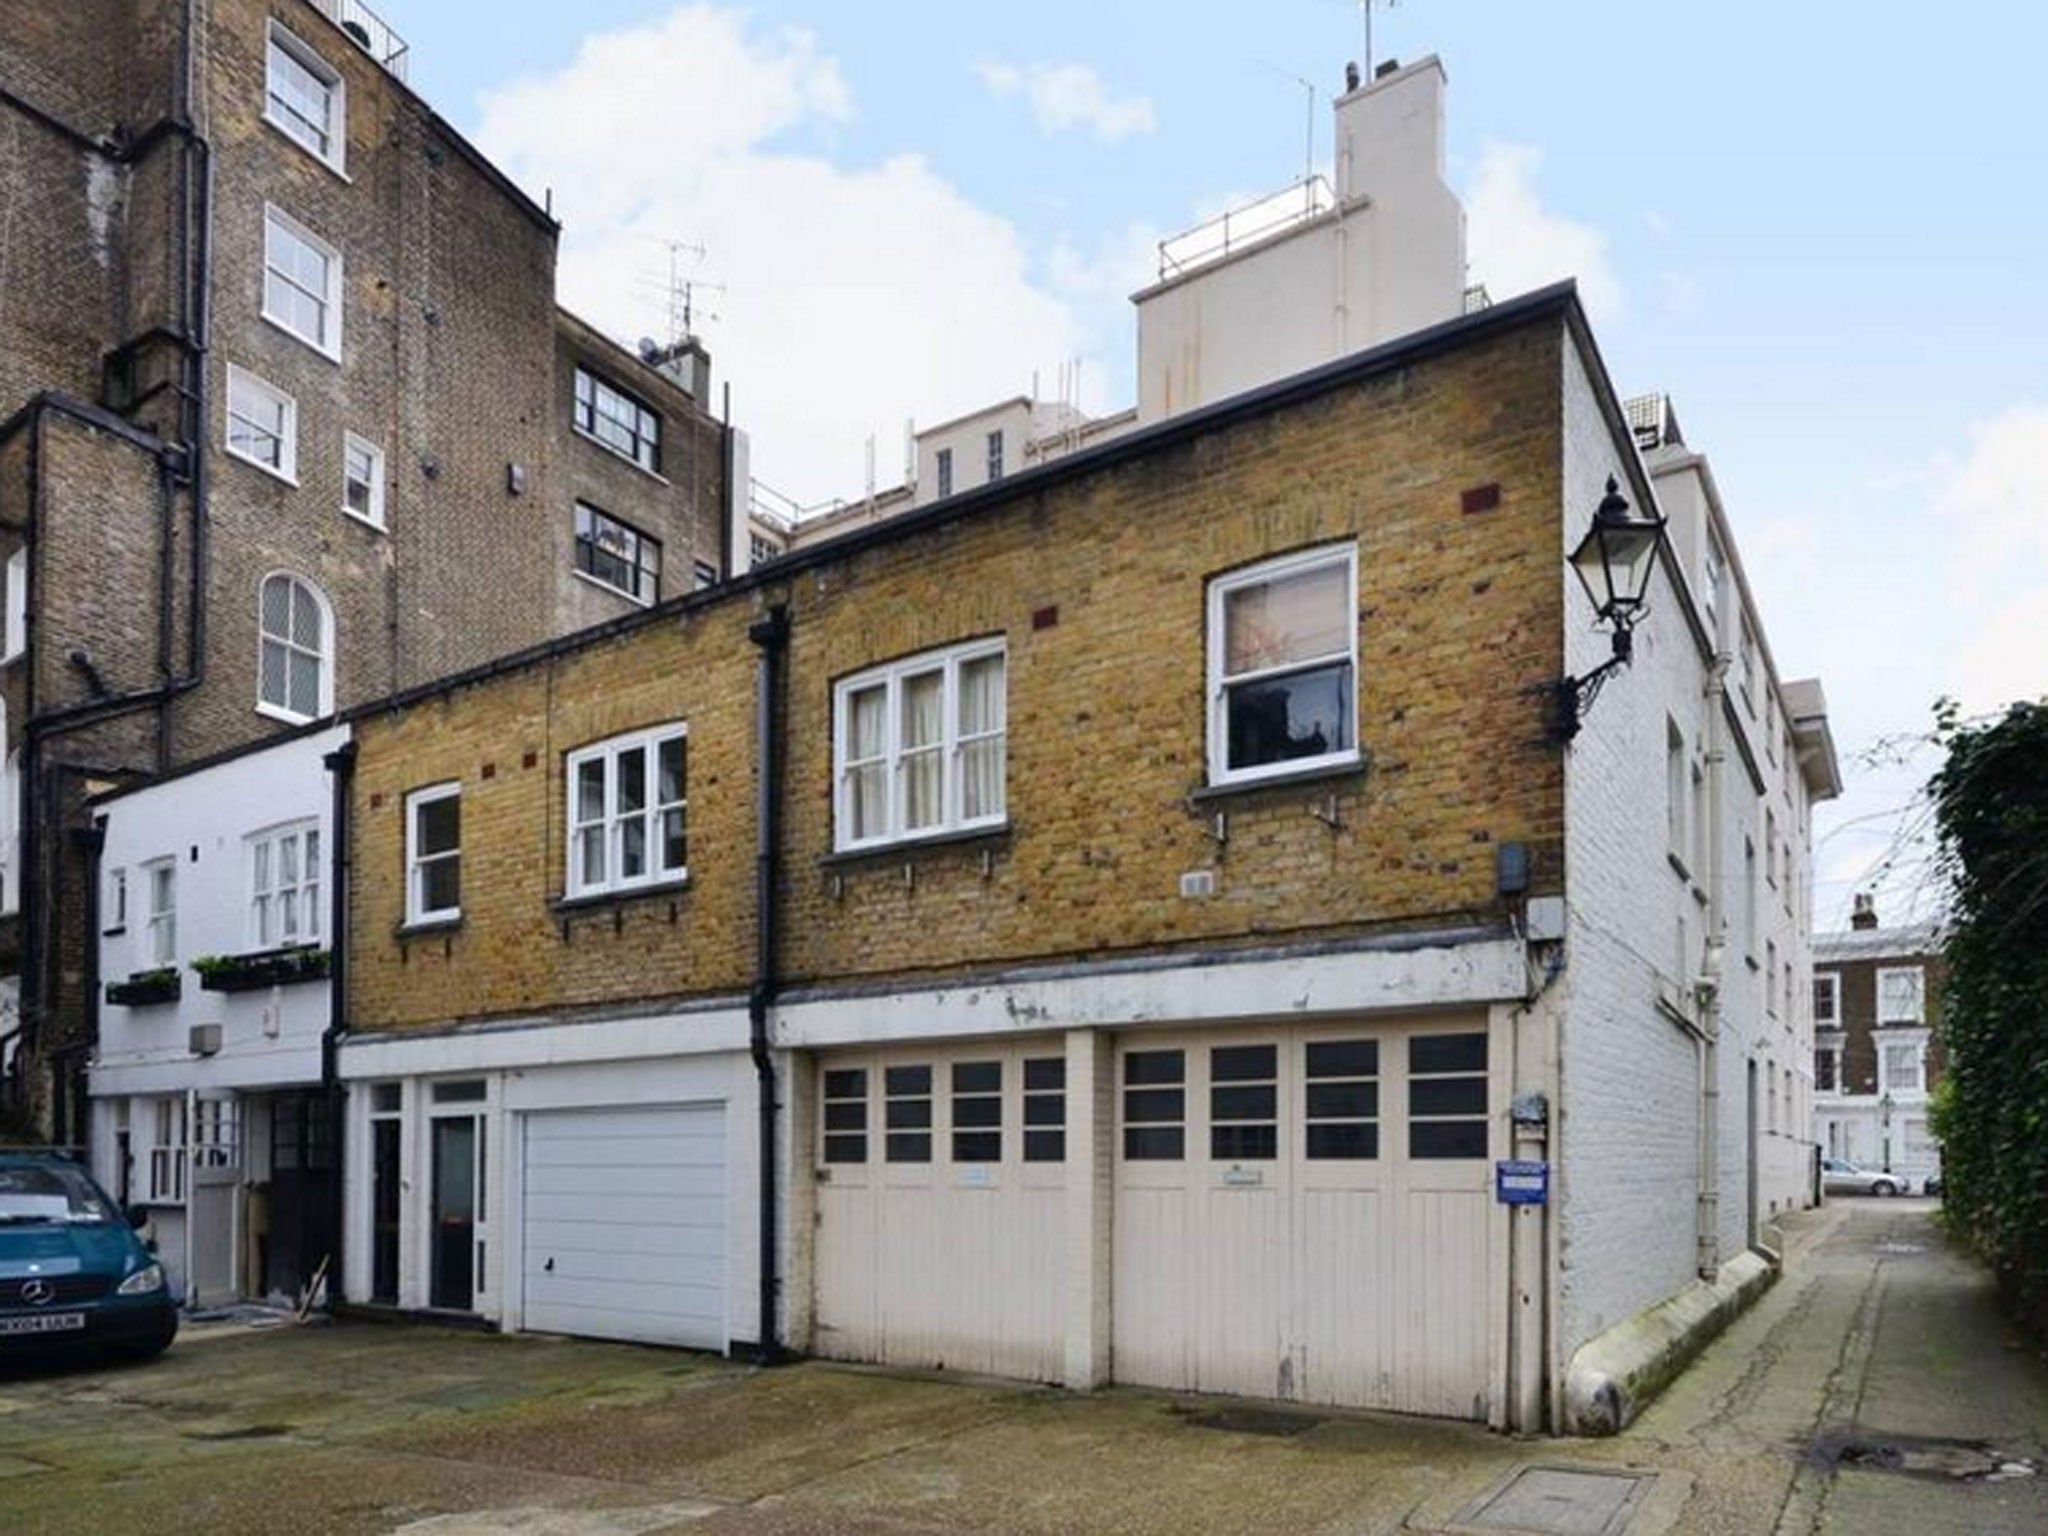 A garage in Kensington which is on sale for £300,000